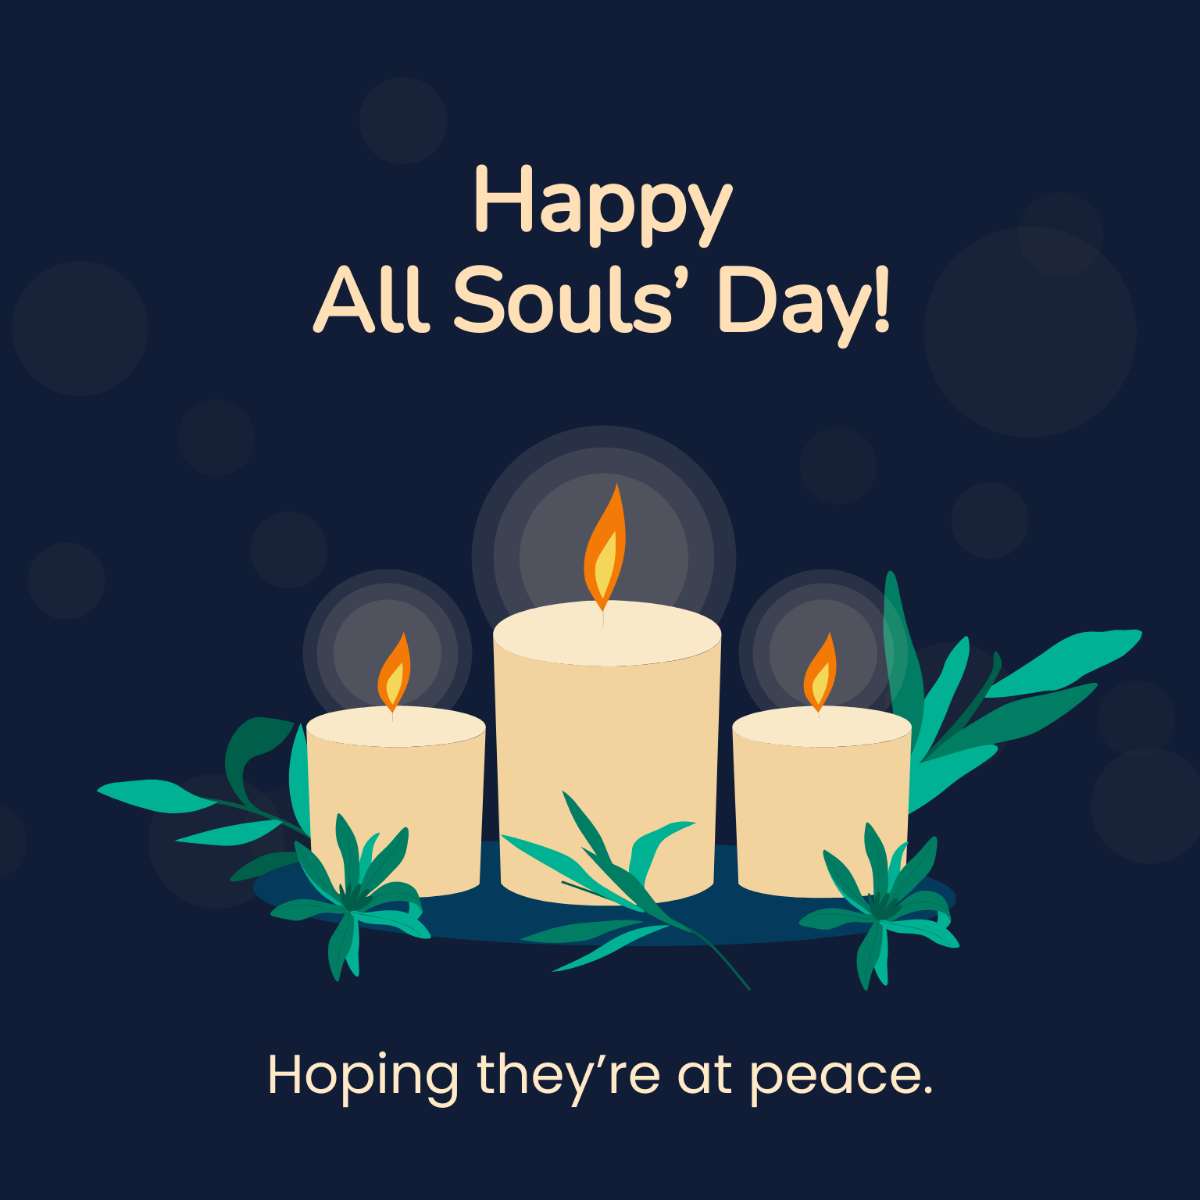 Free All Souls' Day Greeting Card Vector Template